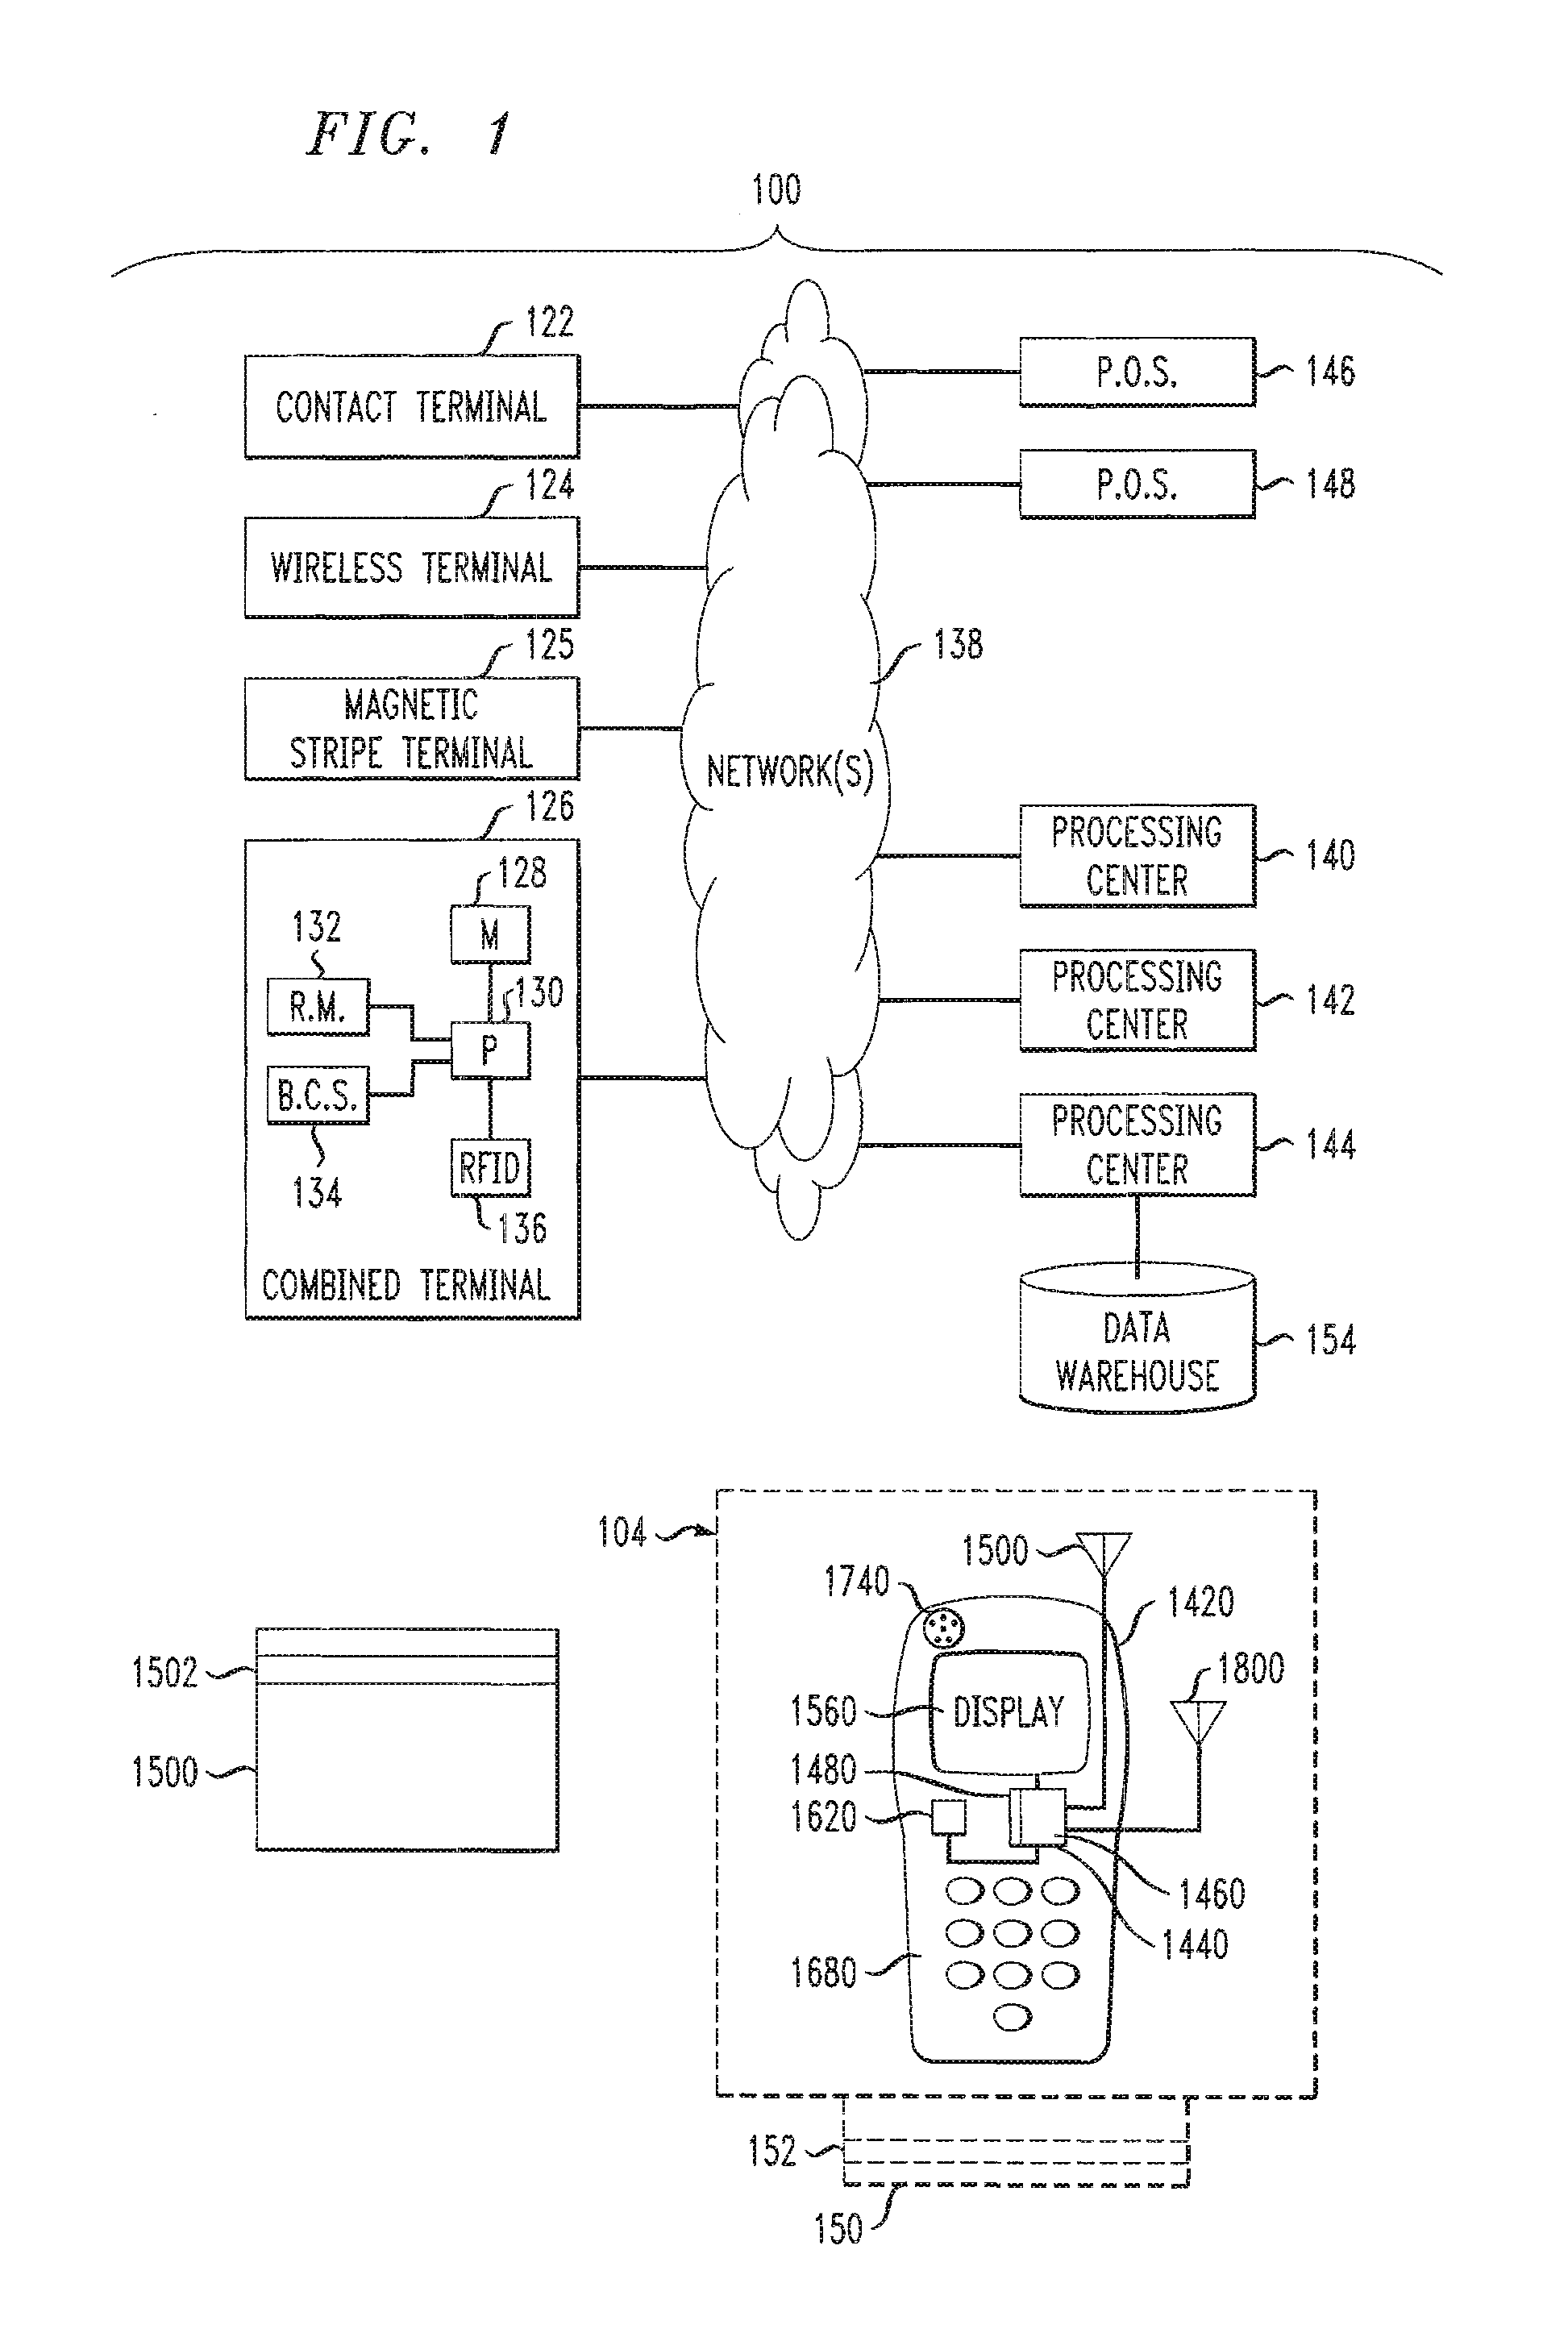 Magnetic stripe attachment and application for mobile electronic devices